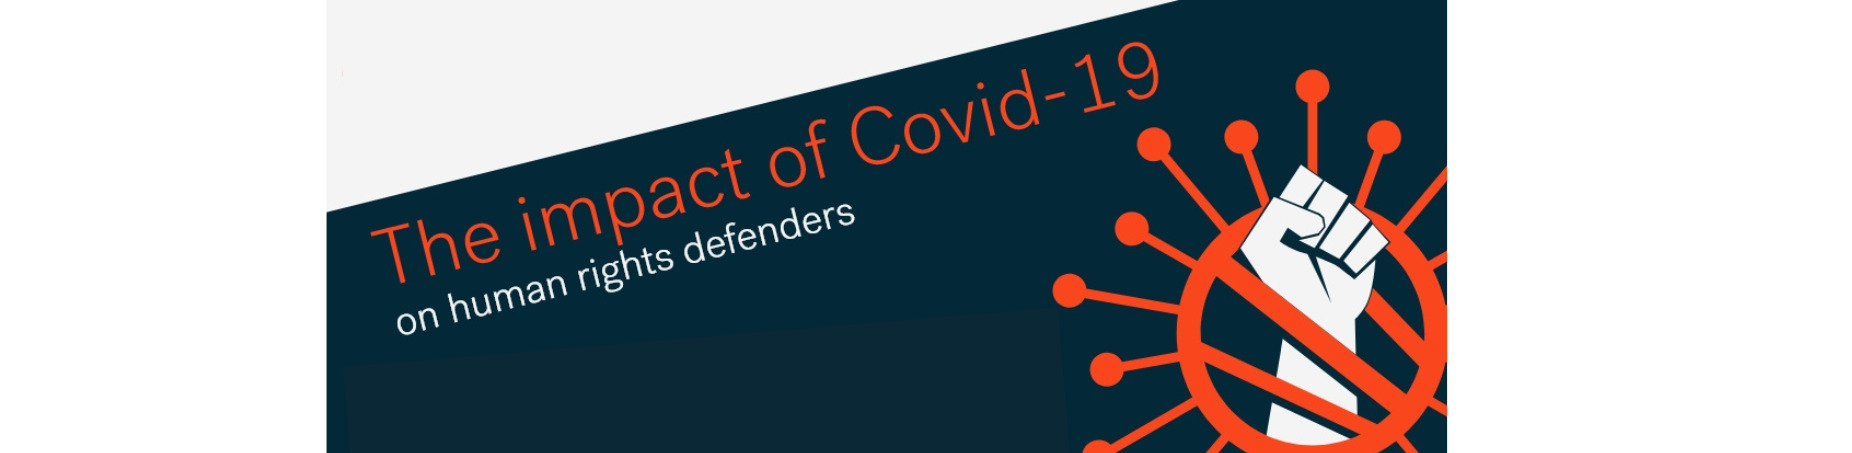 Observatory report "Human rights defenders and Covid-19"